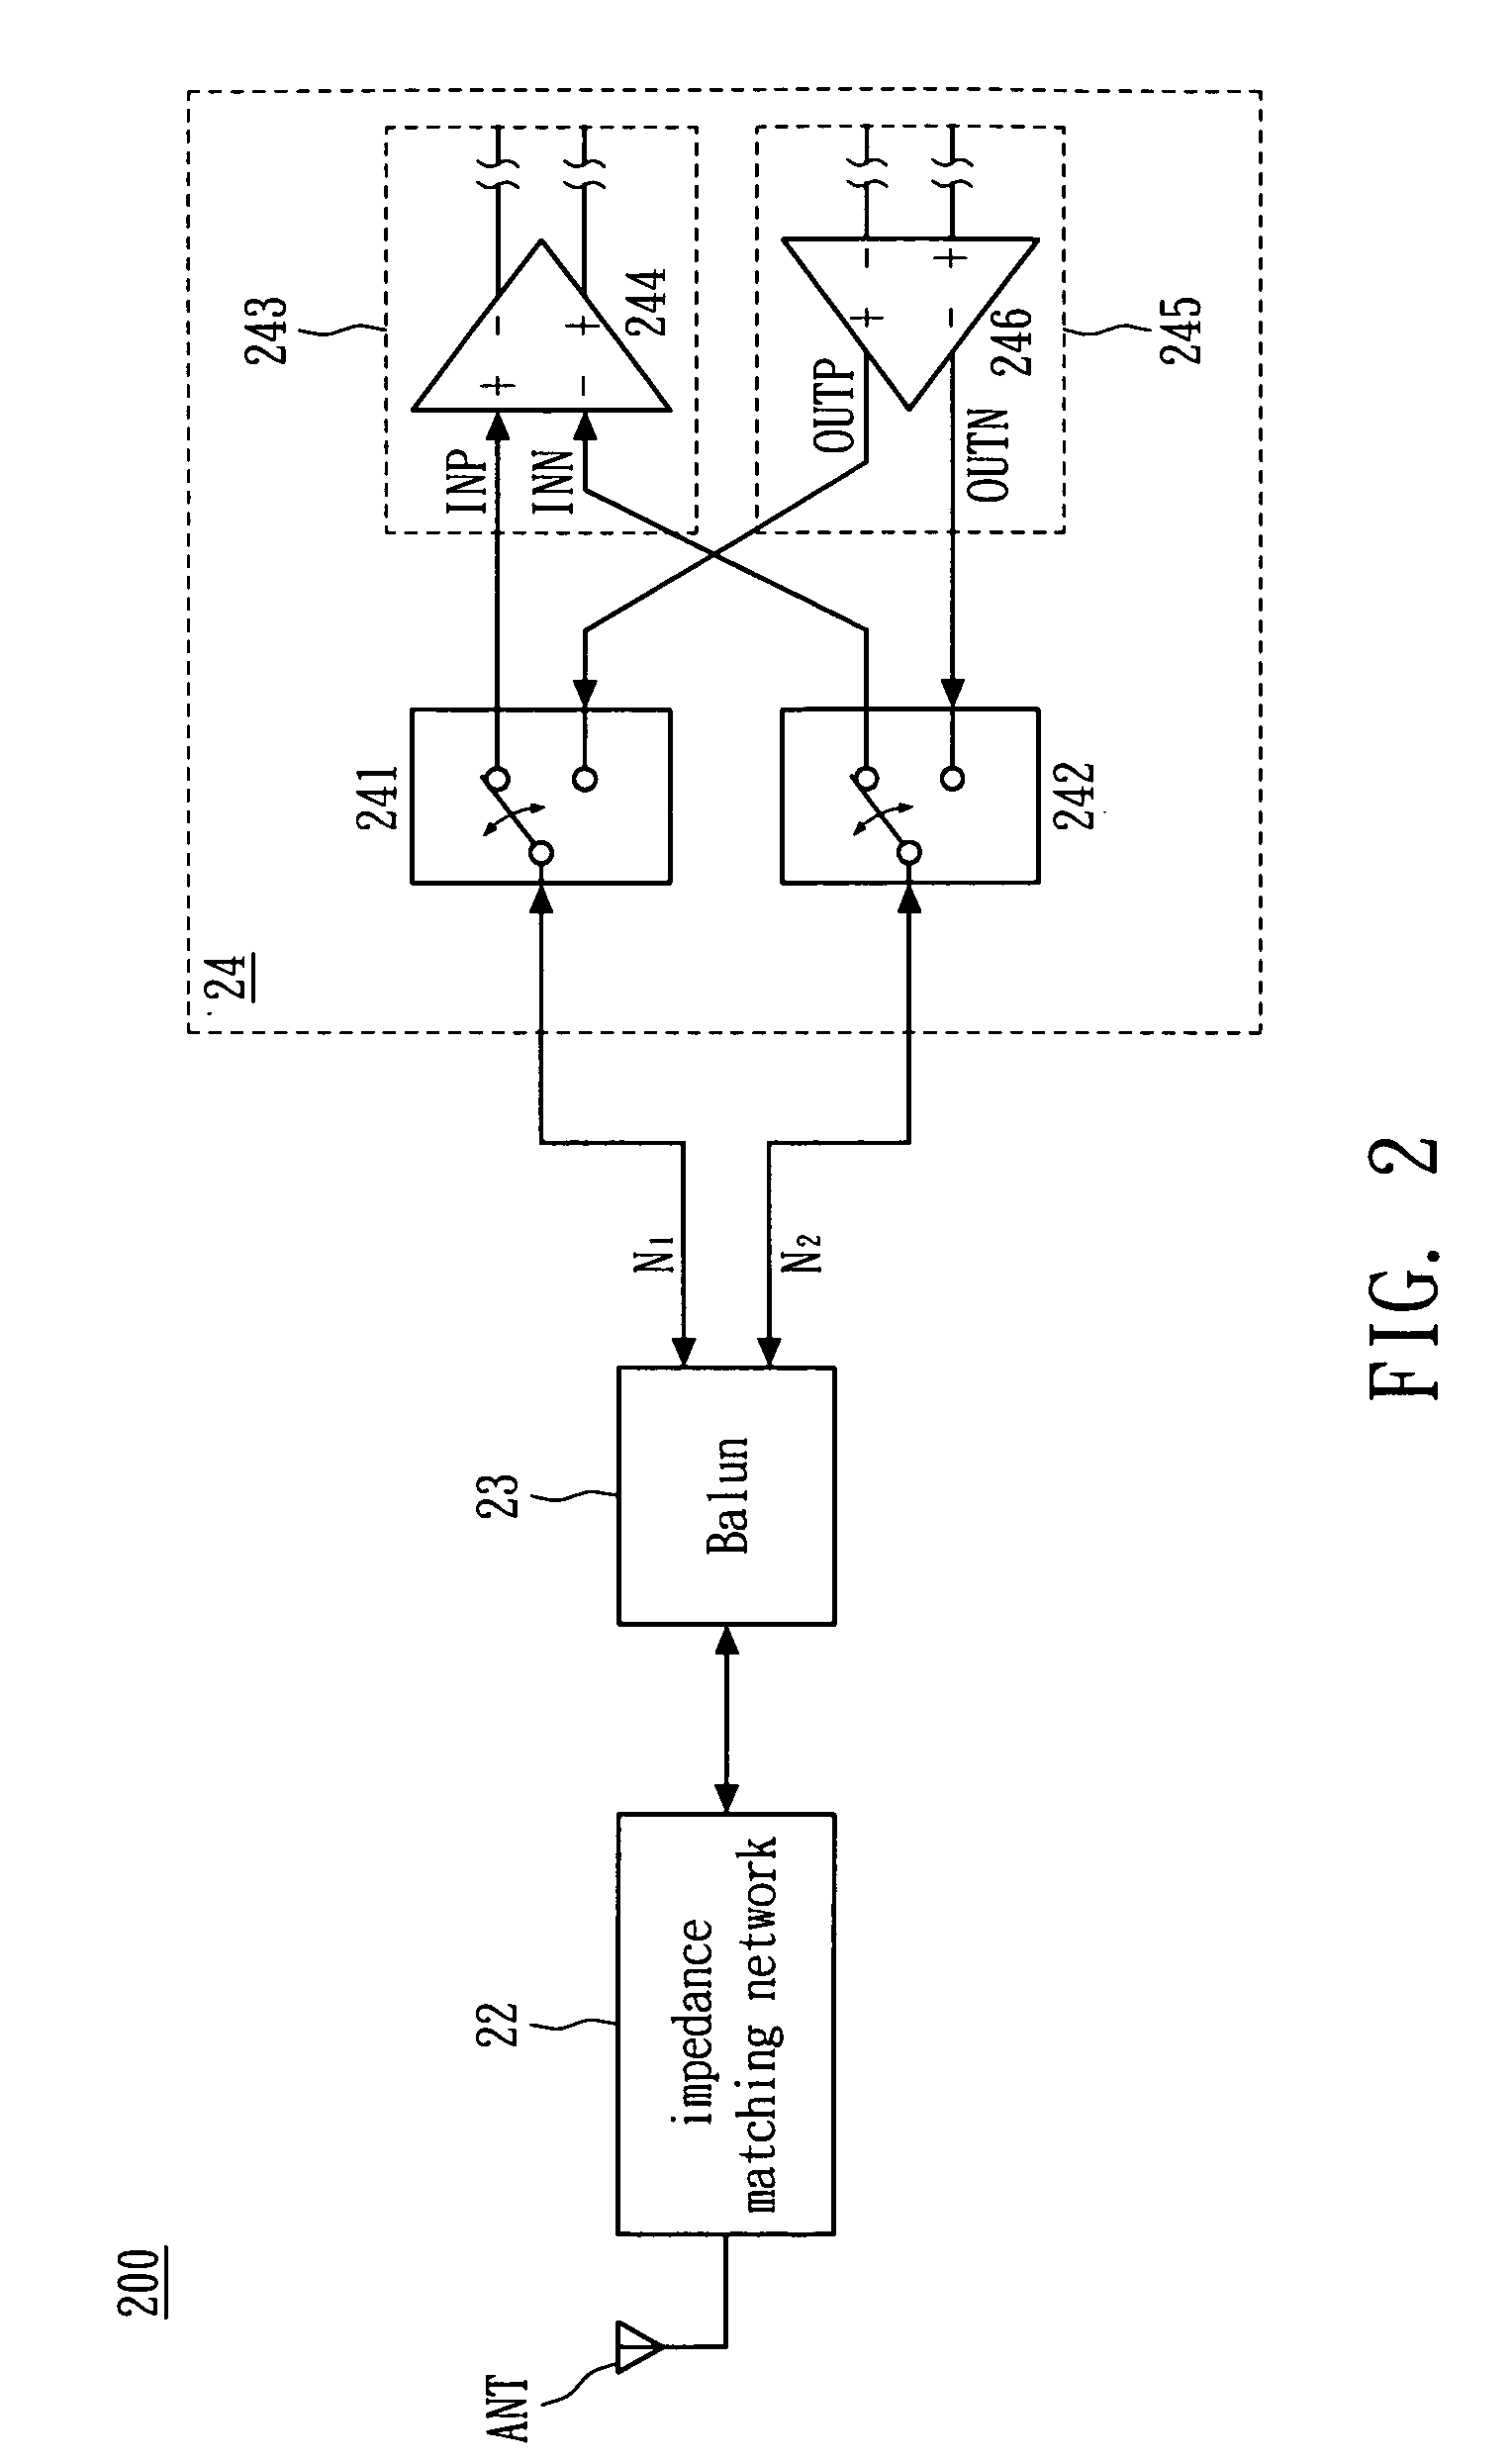 Front-end architecture of RF transceiver and transceiver chip thereof